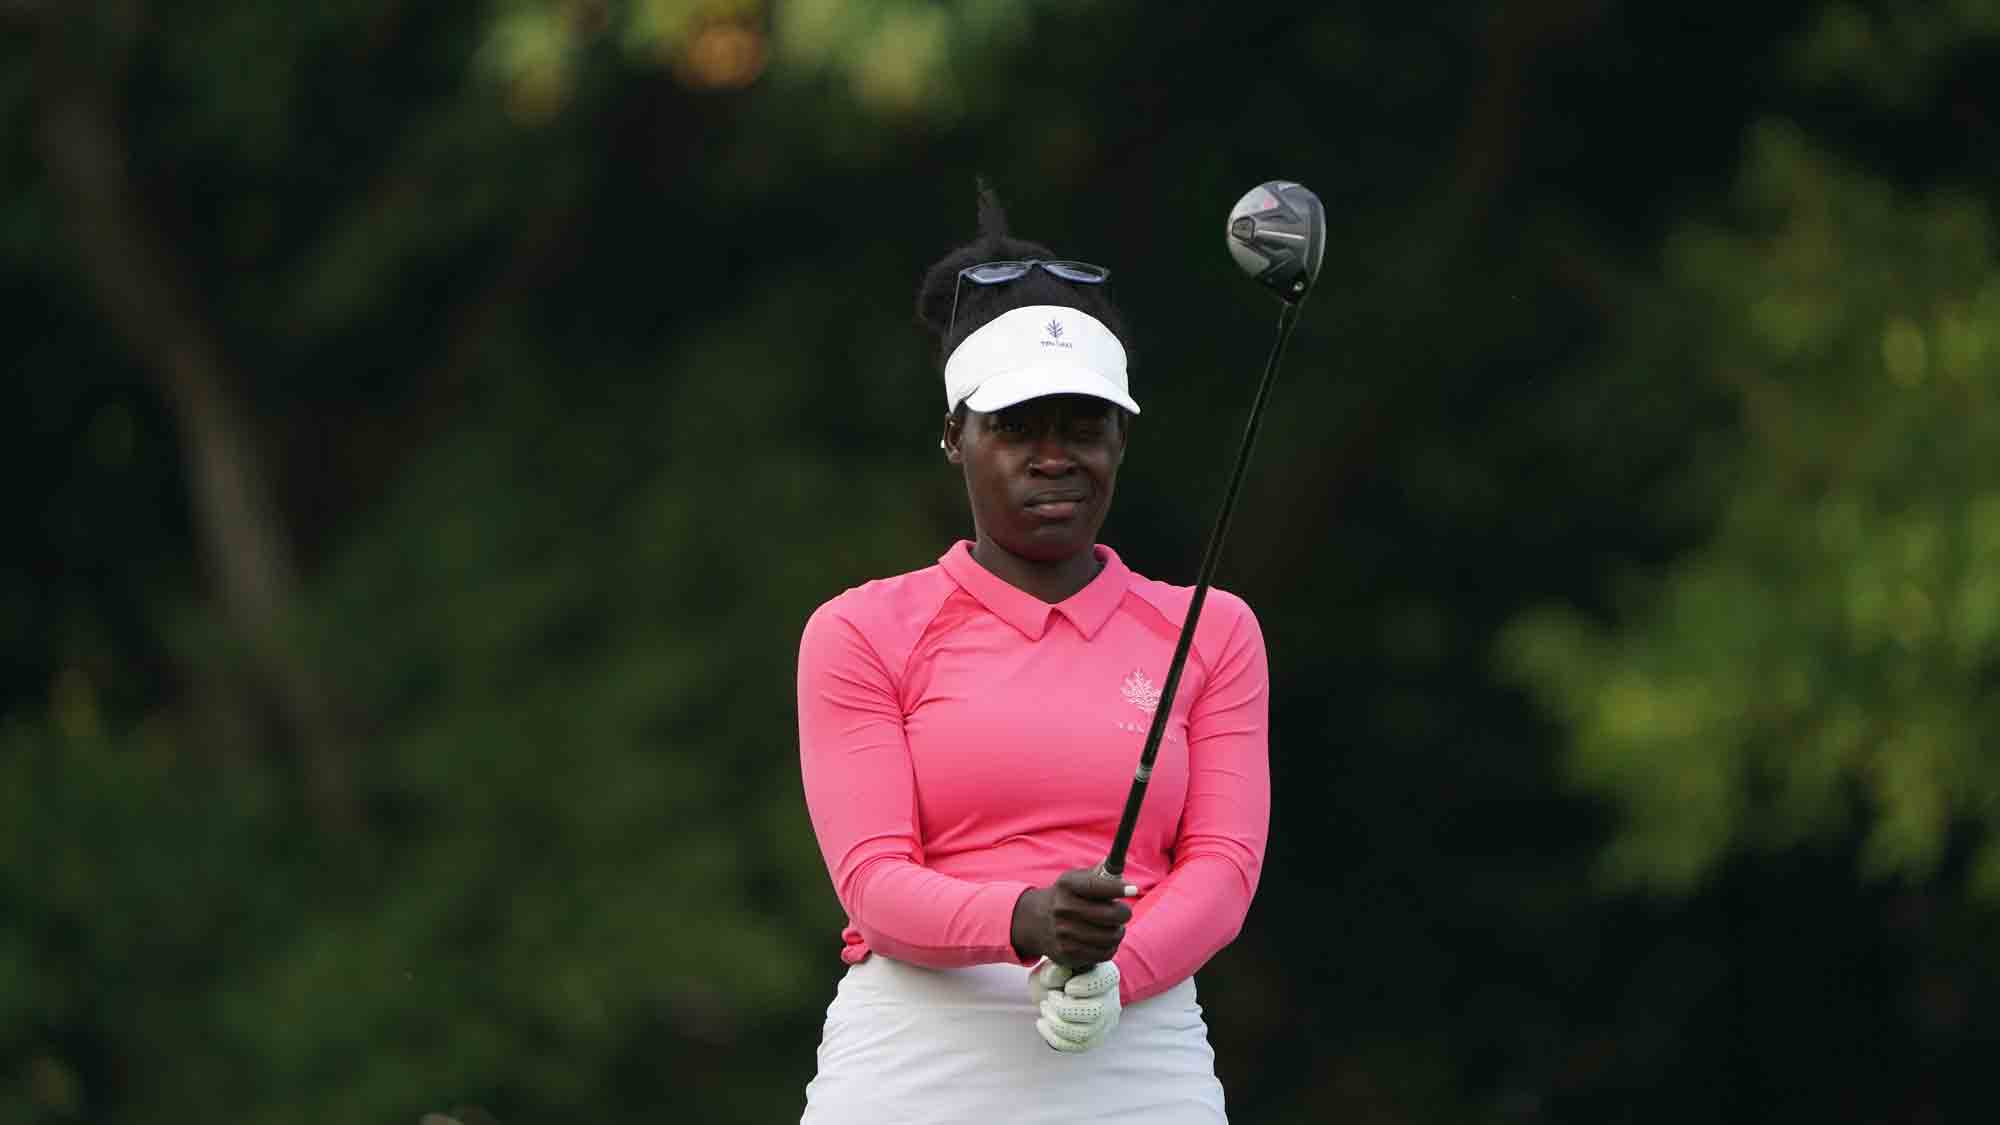 Lakareber Abe during the opening round of the Four Winds Invitational